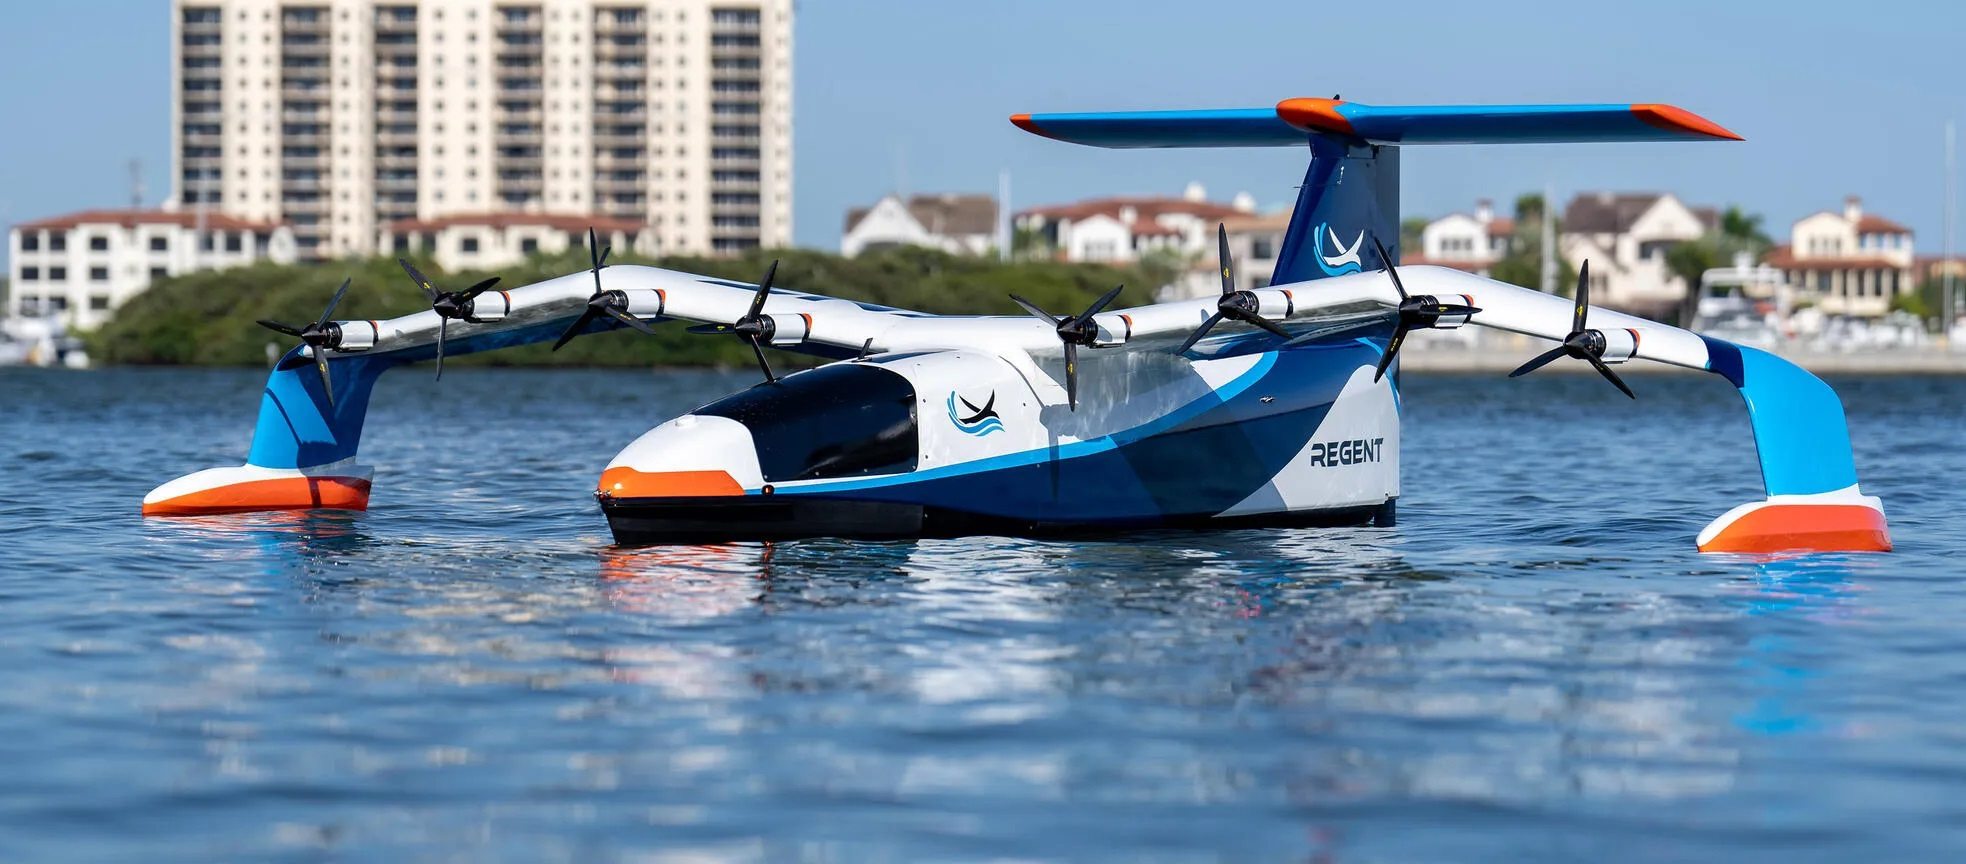 Regent Secures $60 Million In Funding To Take Electric Seaglider Startup To New Heights